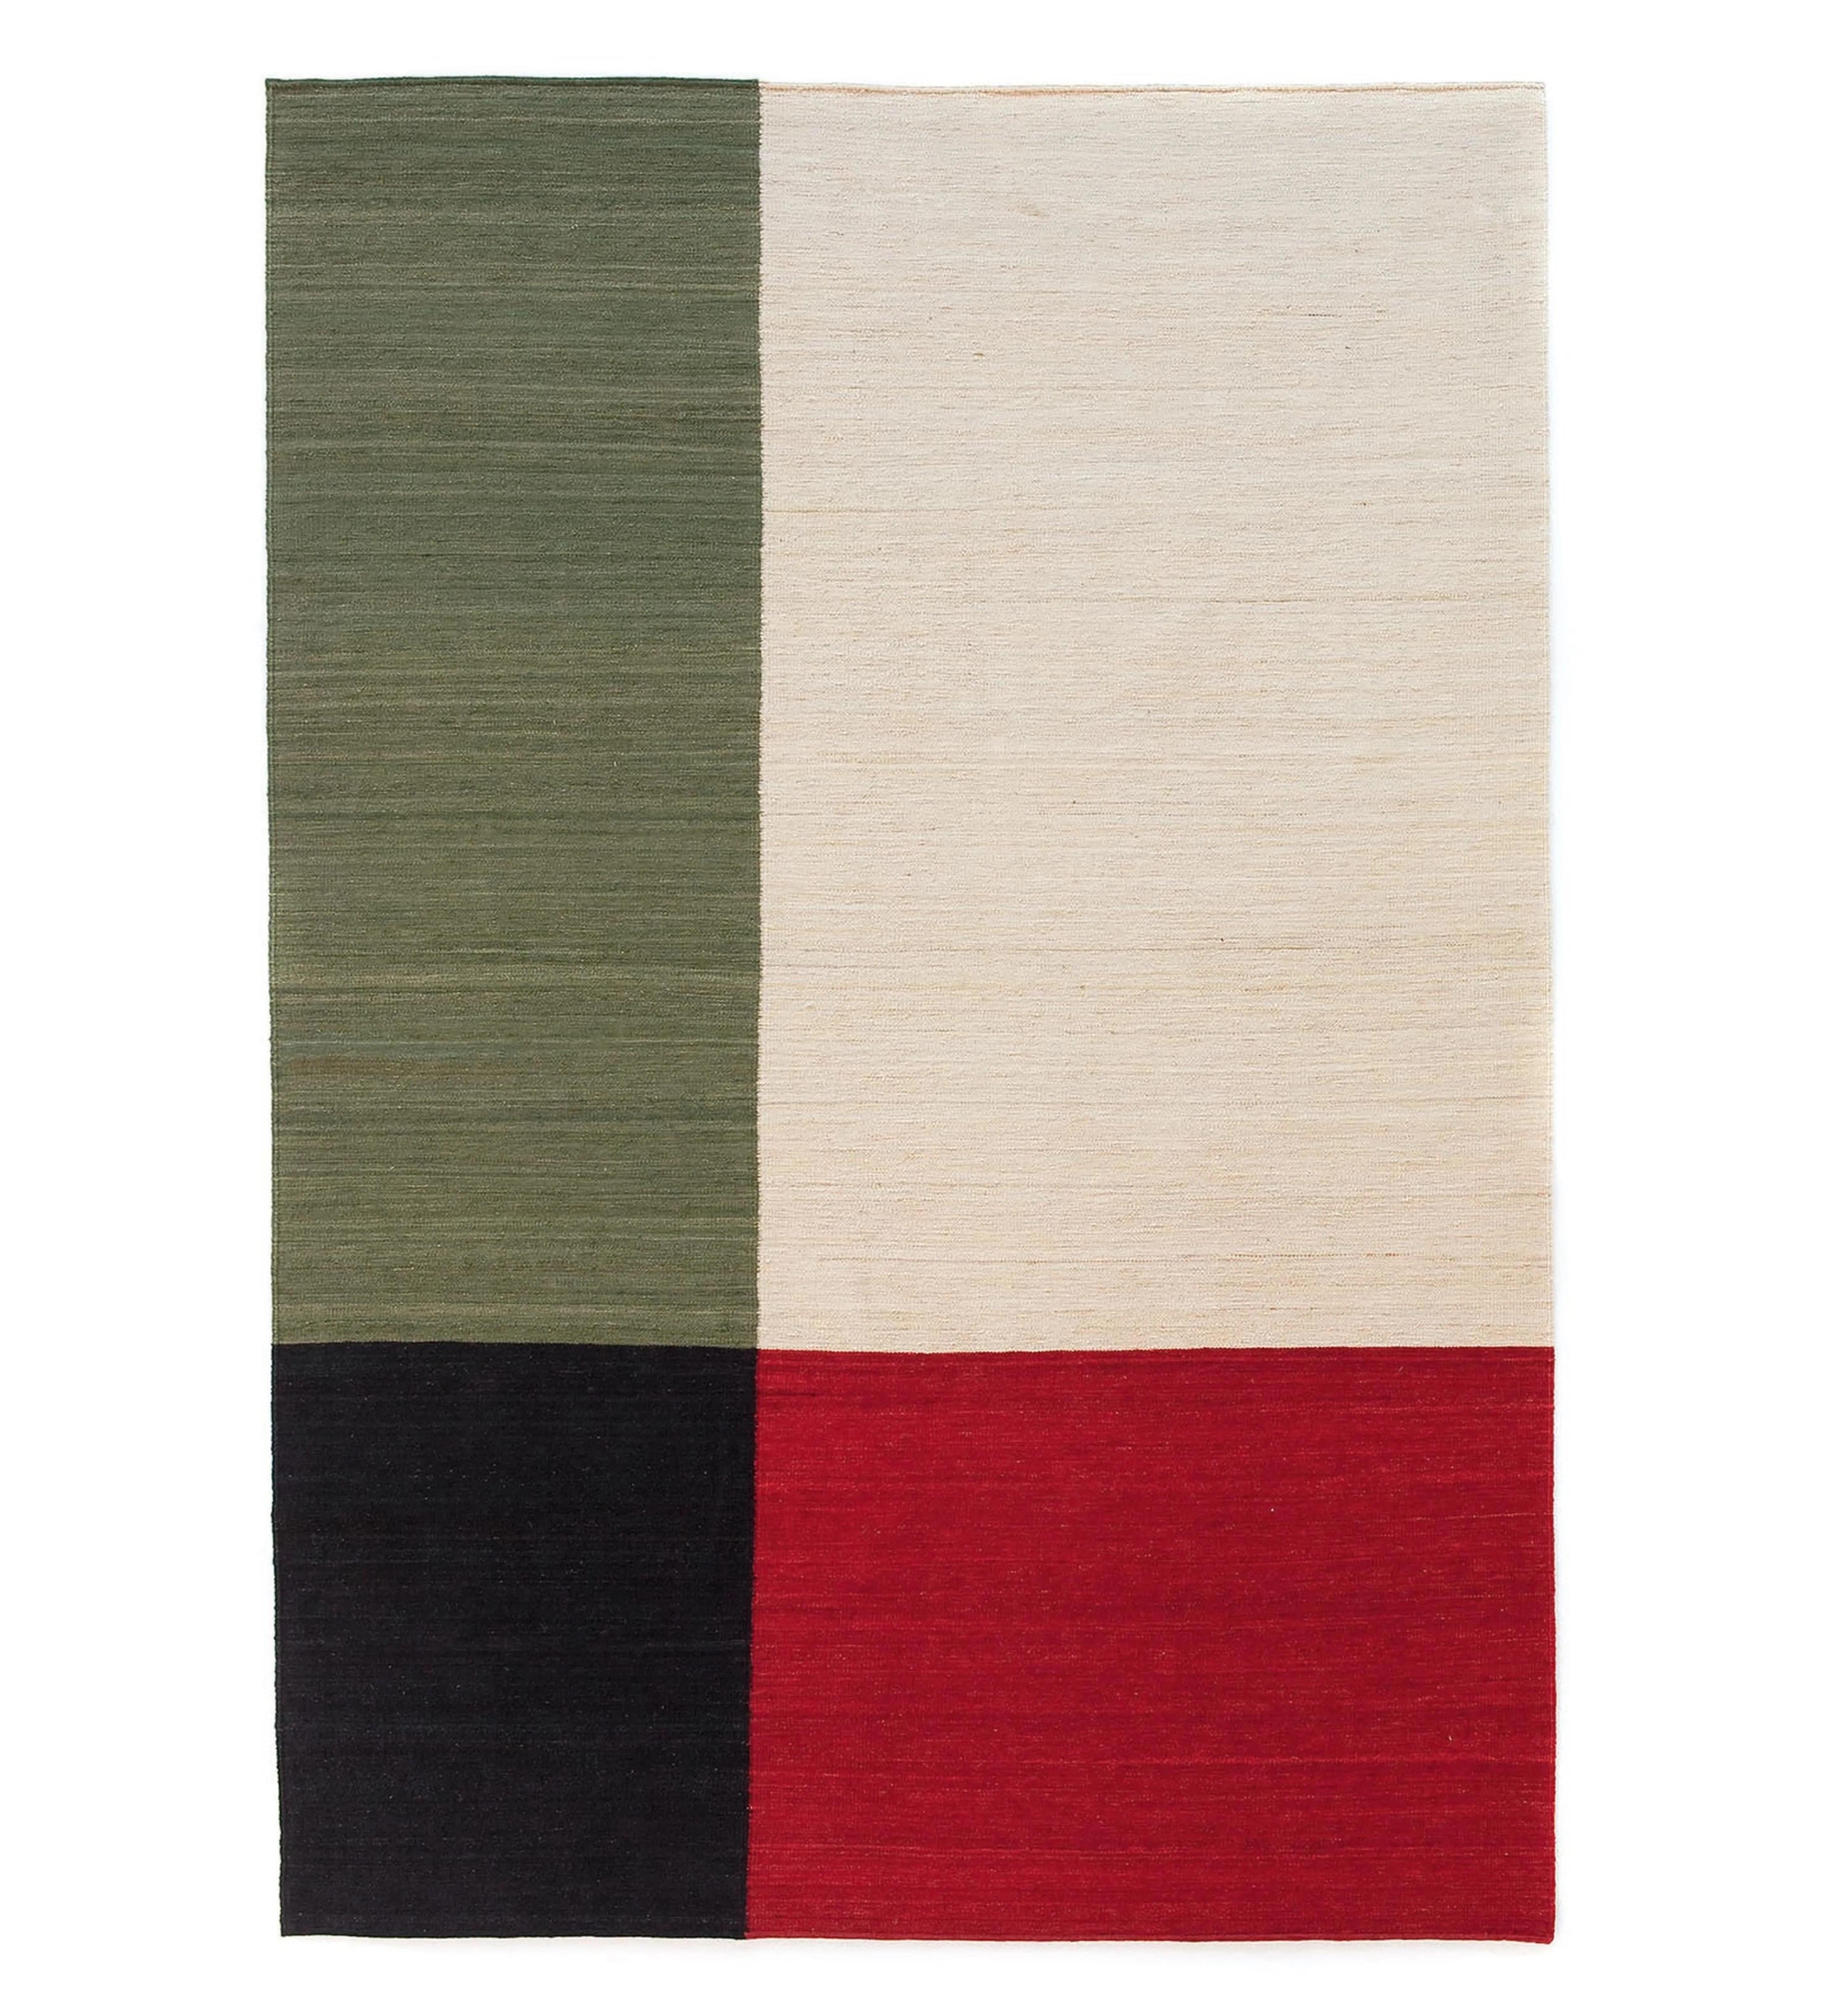 Wool 'Mélange Color 2' Hand-Loomed Rug by Sybilla for Nanimarquina For Sale